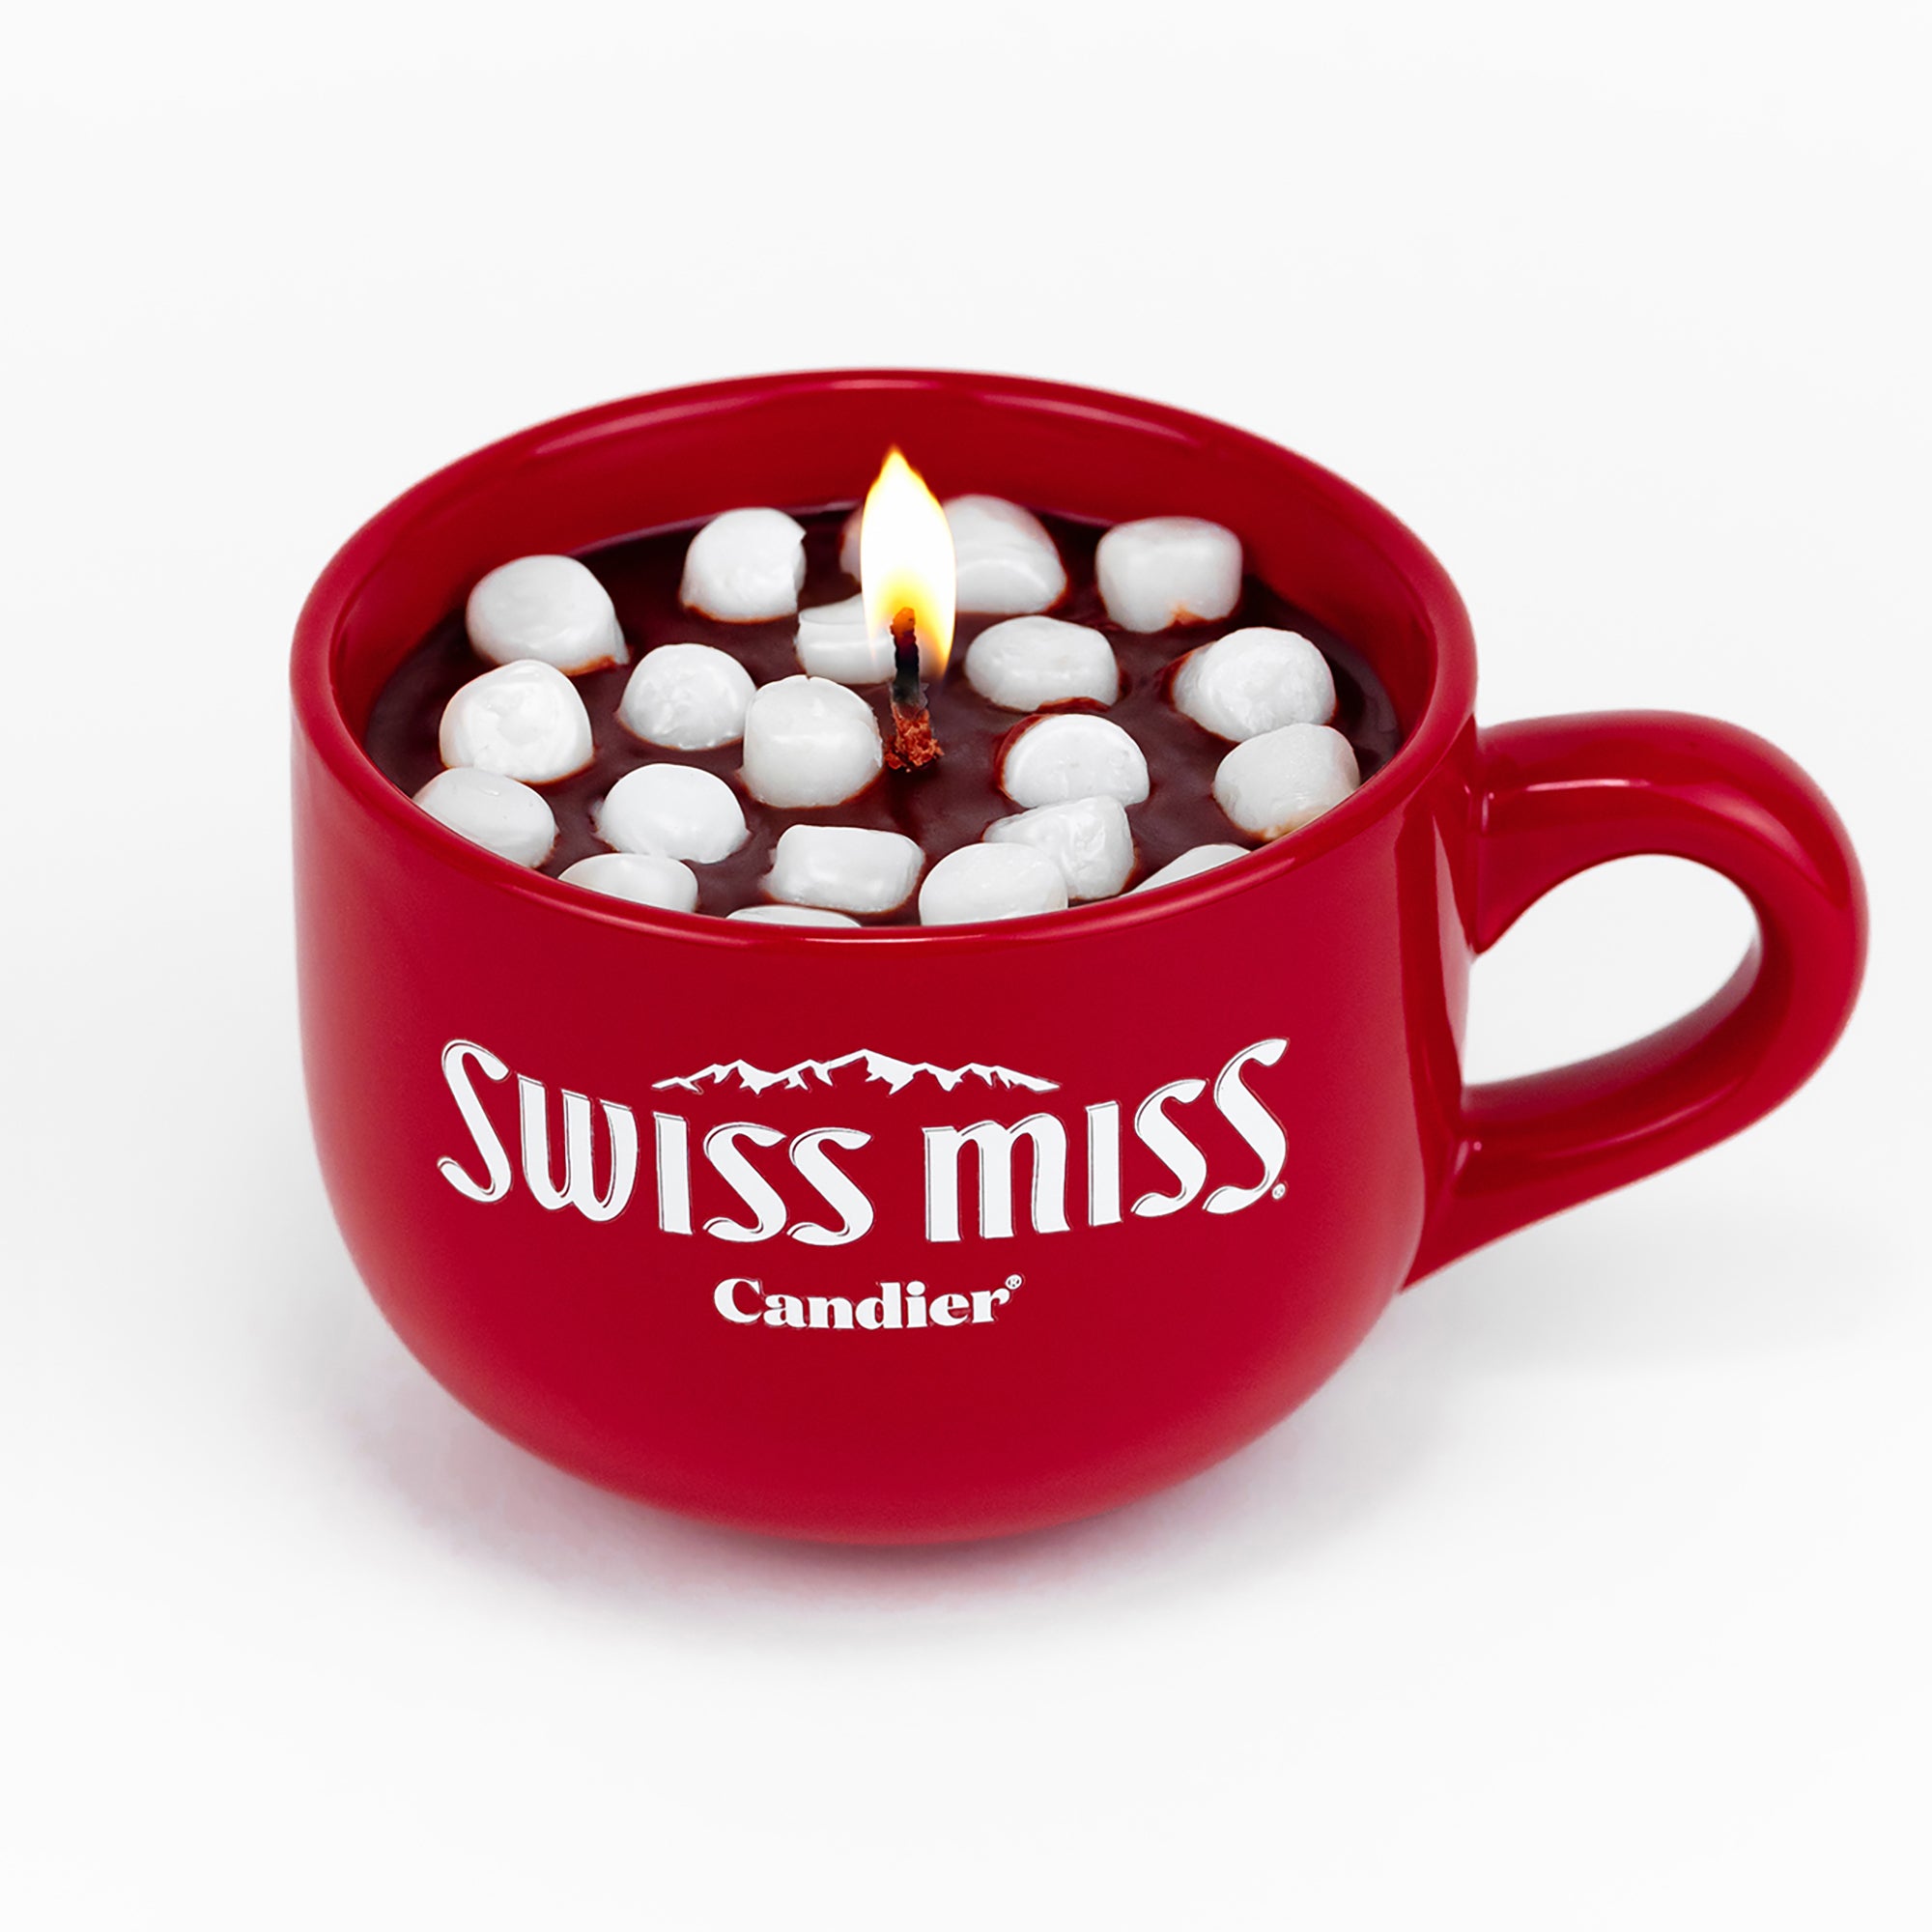 SWISS MISS CANDLE